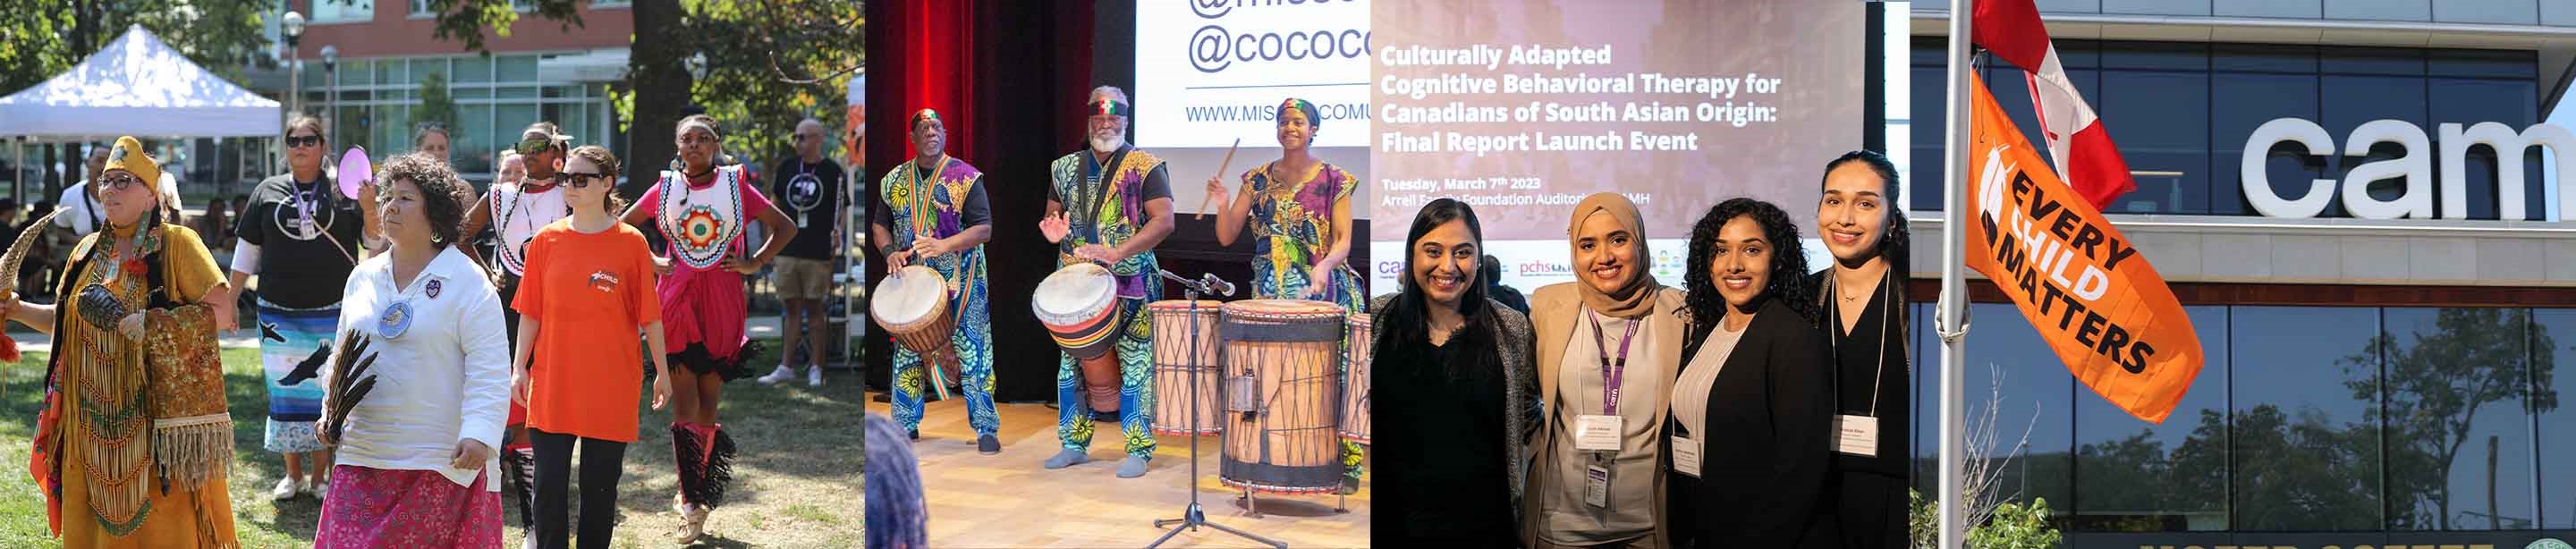 Diverse community events at CAMH